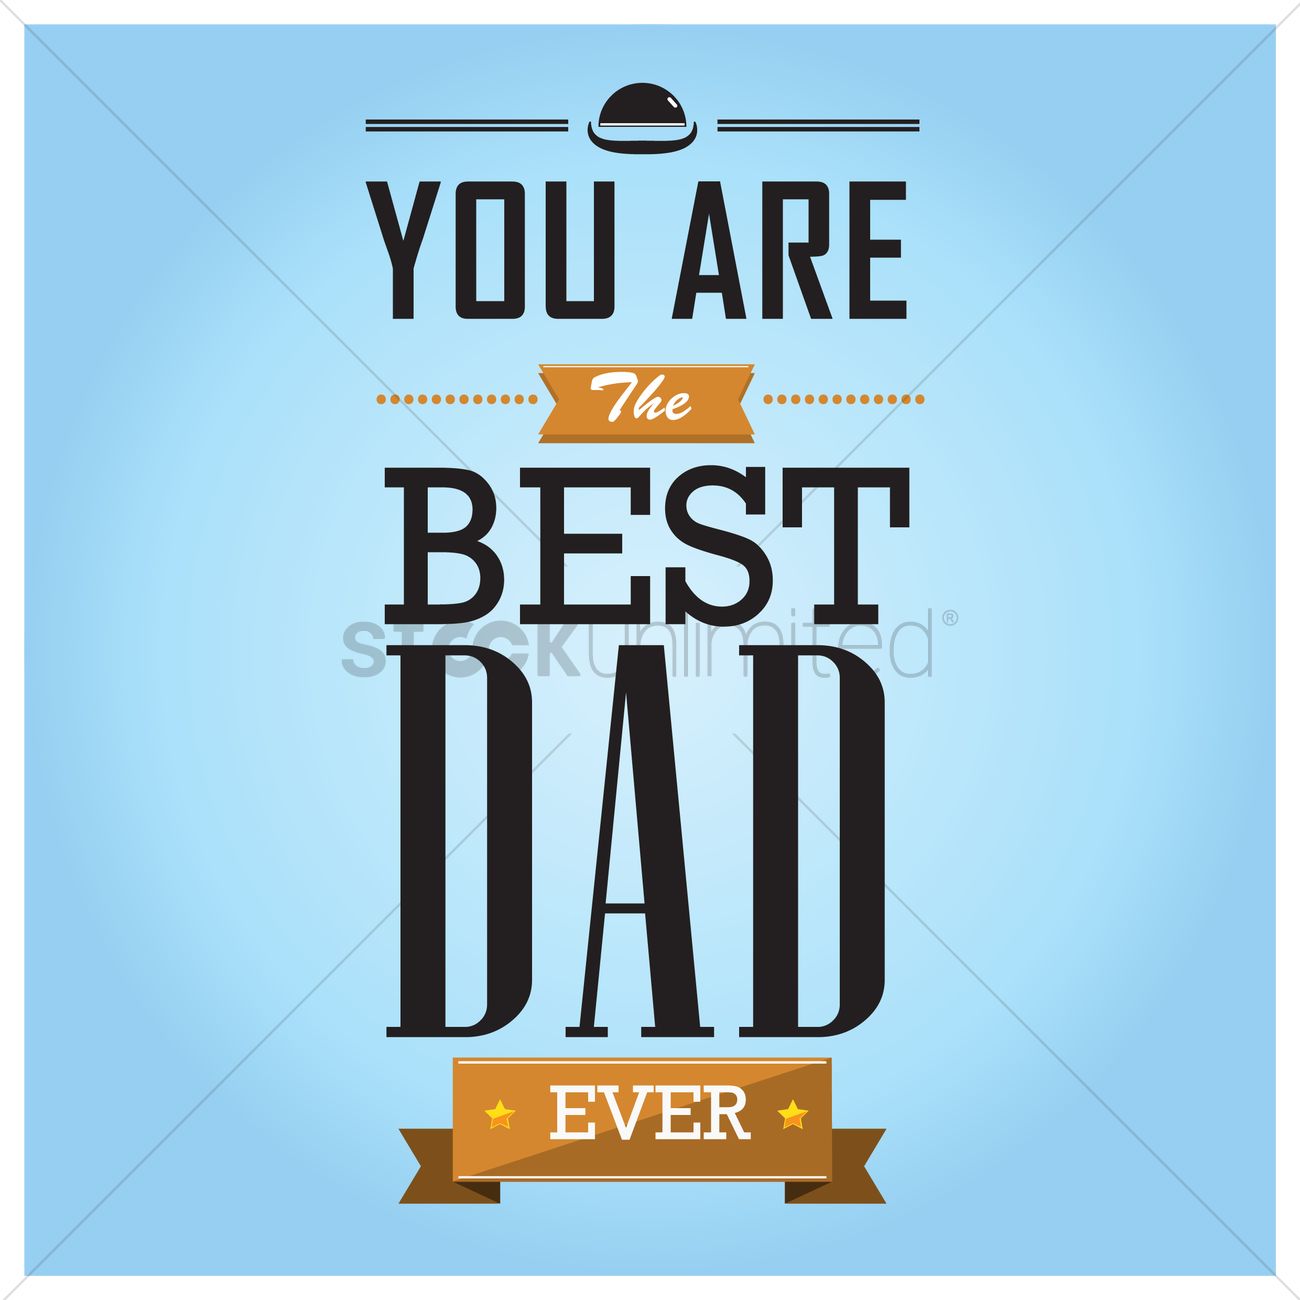 Happy father's day wallpaper Vector Image